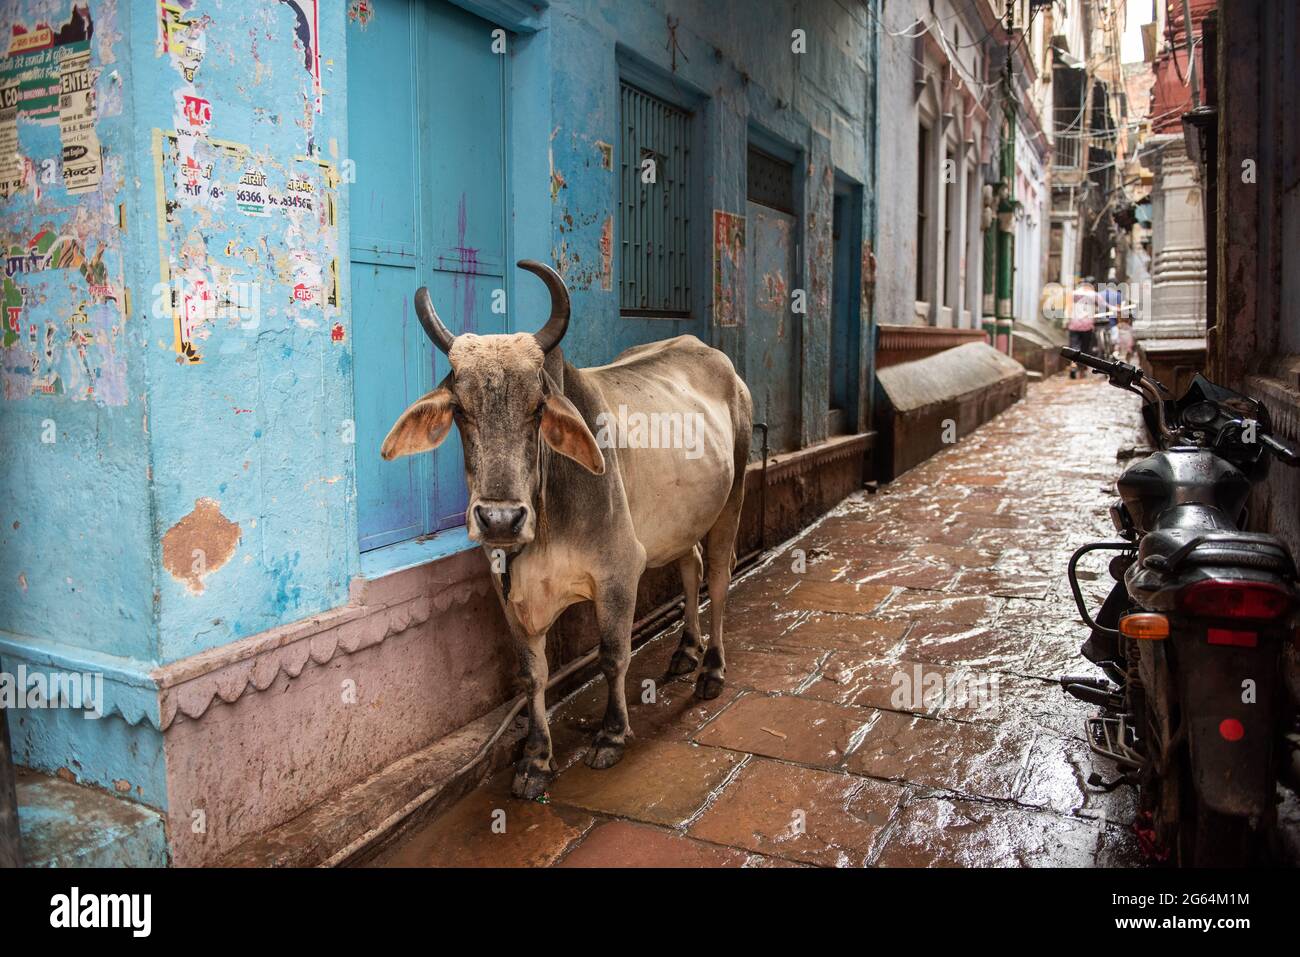 A large, sacred cow standing in an alleyway in Varanasi, India. Stock Photo